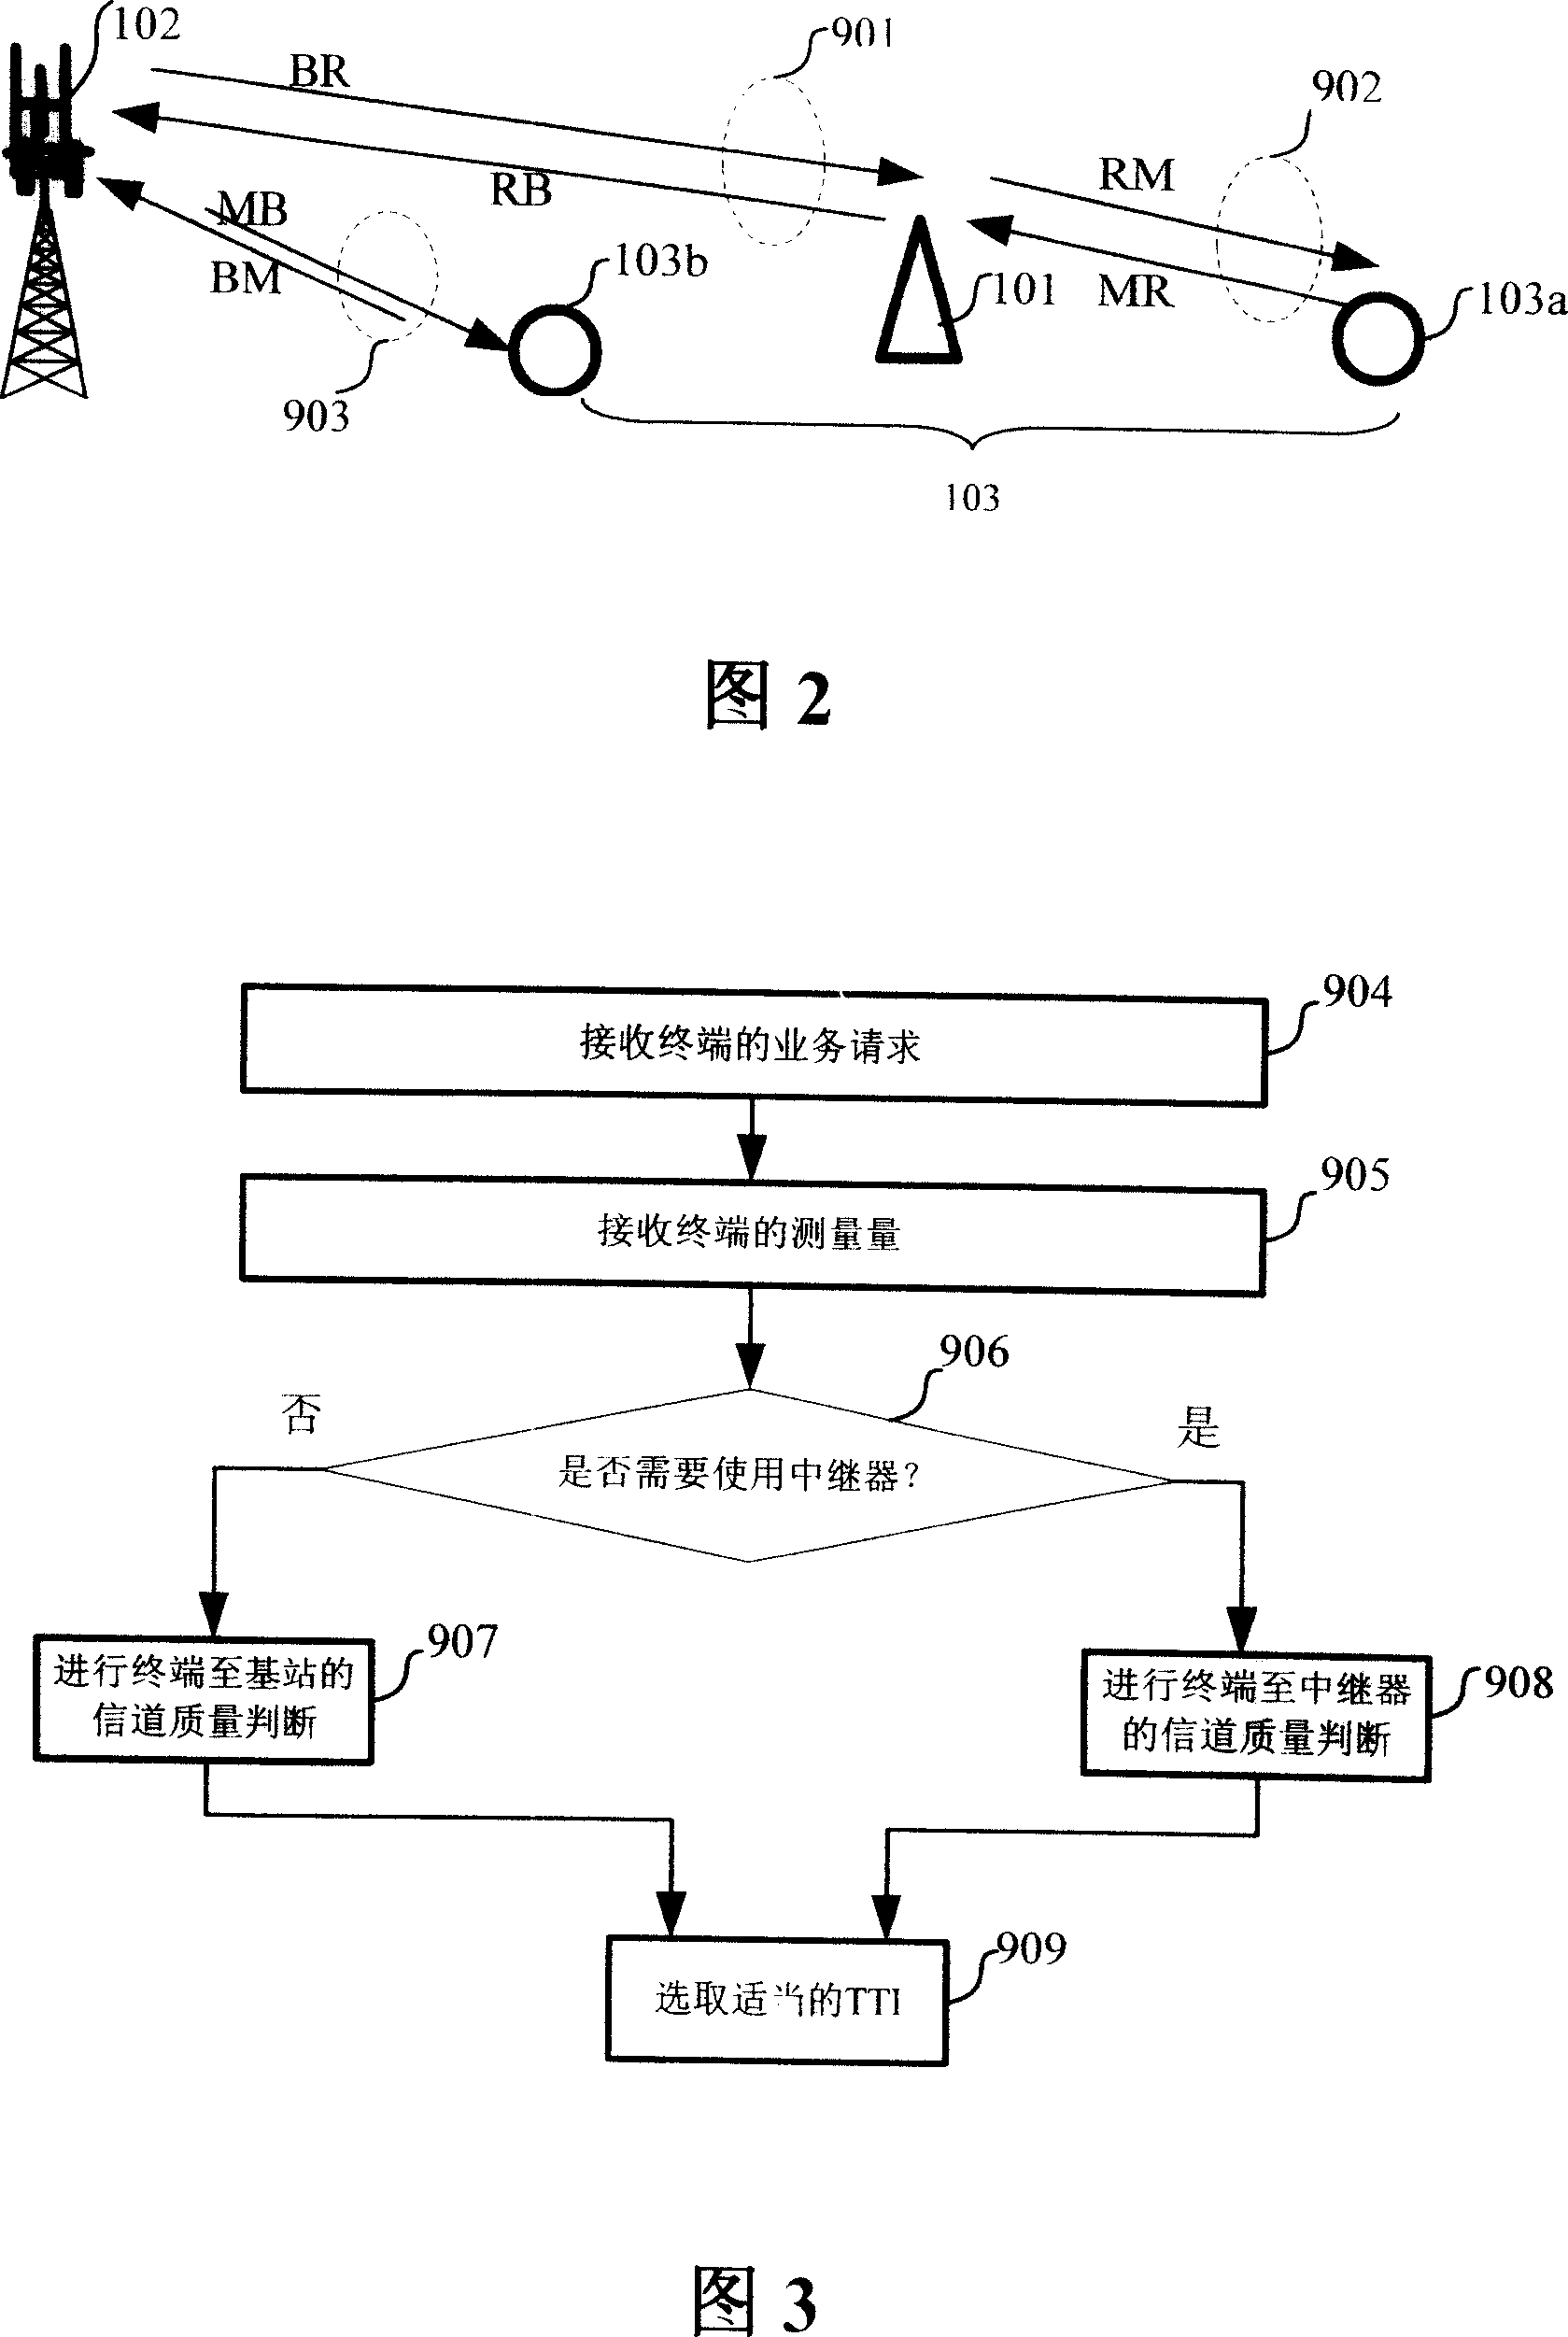 Method for selecting wireless digital relay system and transmission time spacing